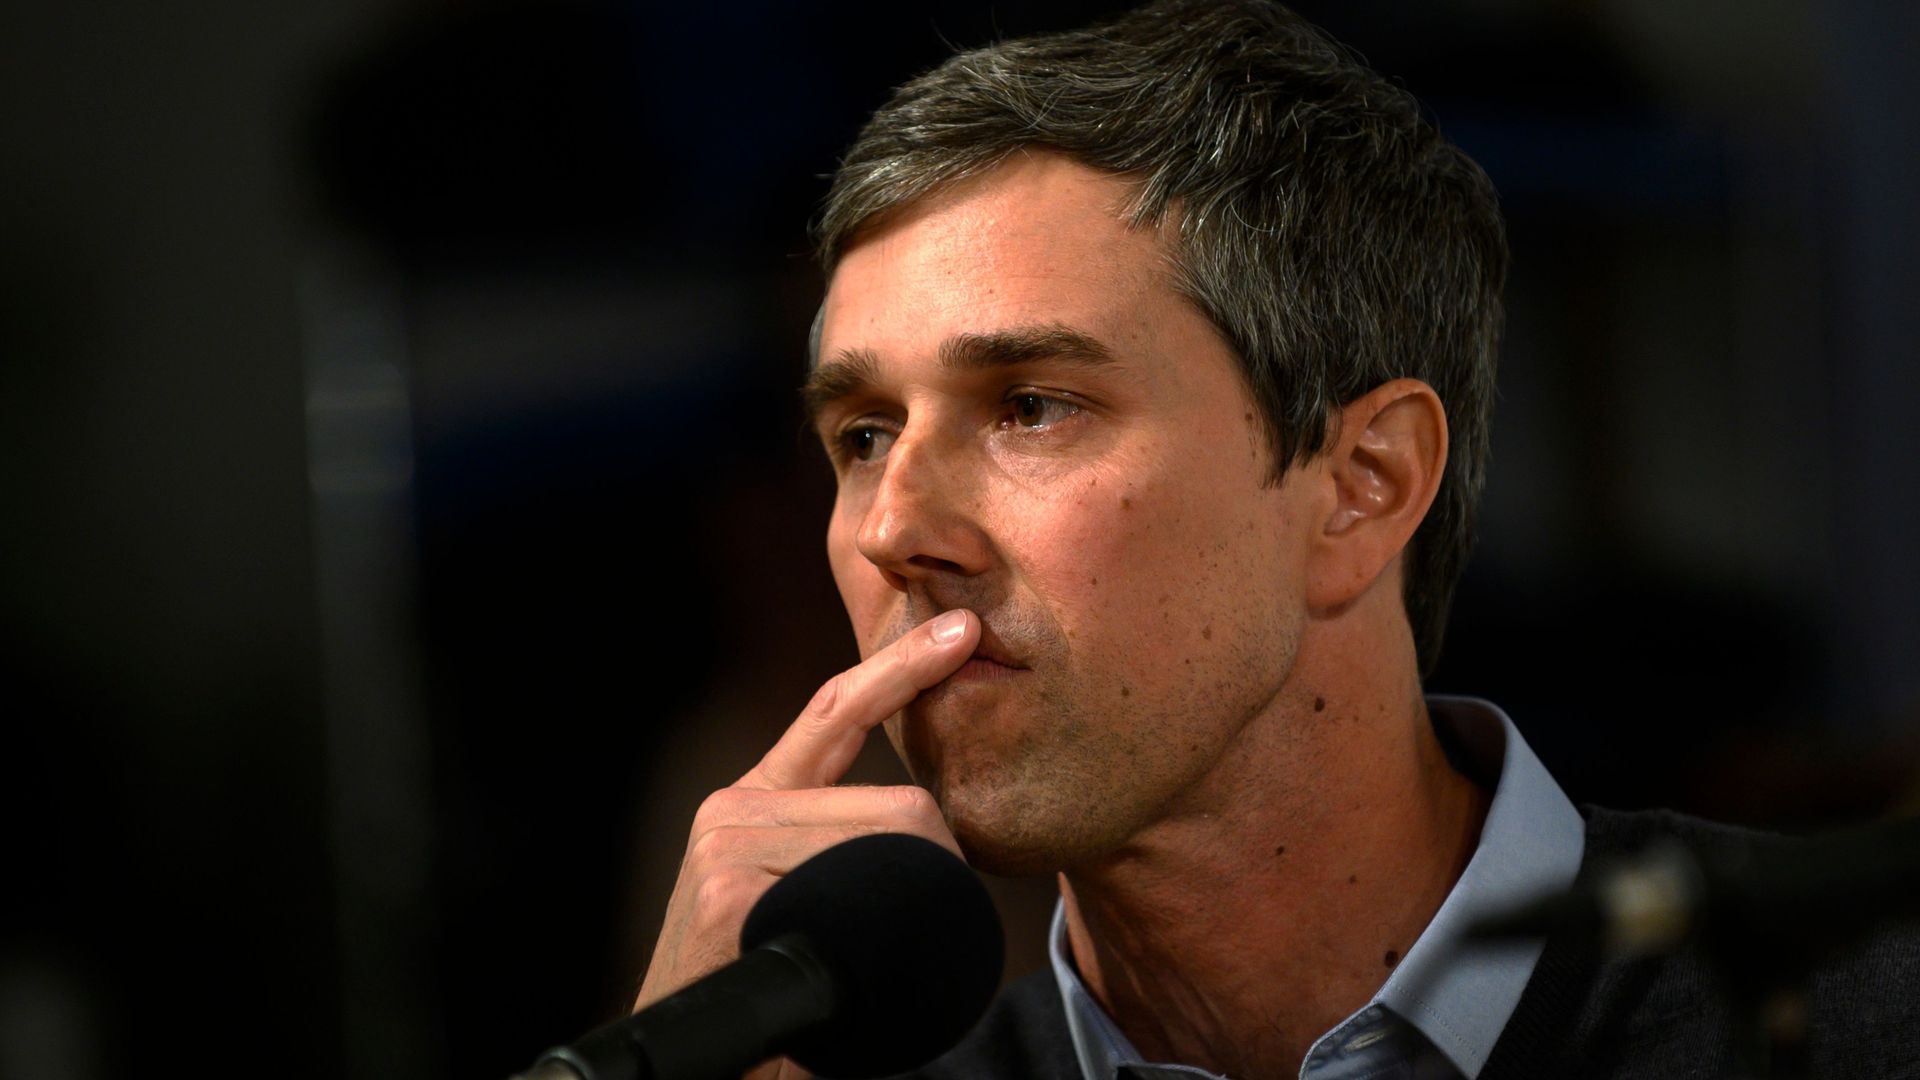 Former Texas Congressman and Democratic party presidential candidate Beto O'Rourke